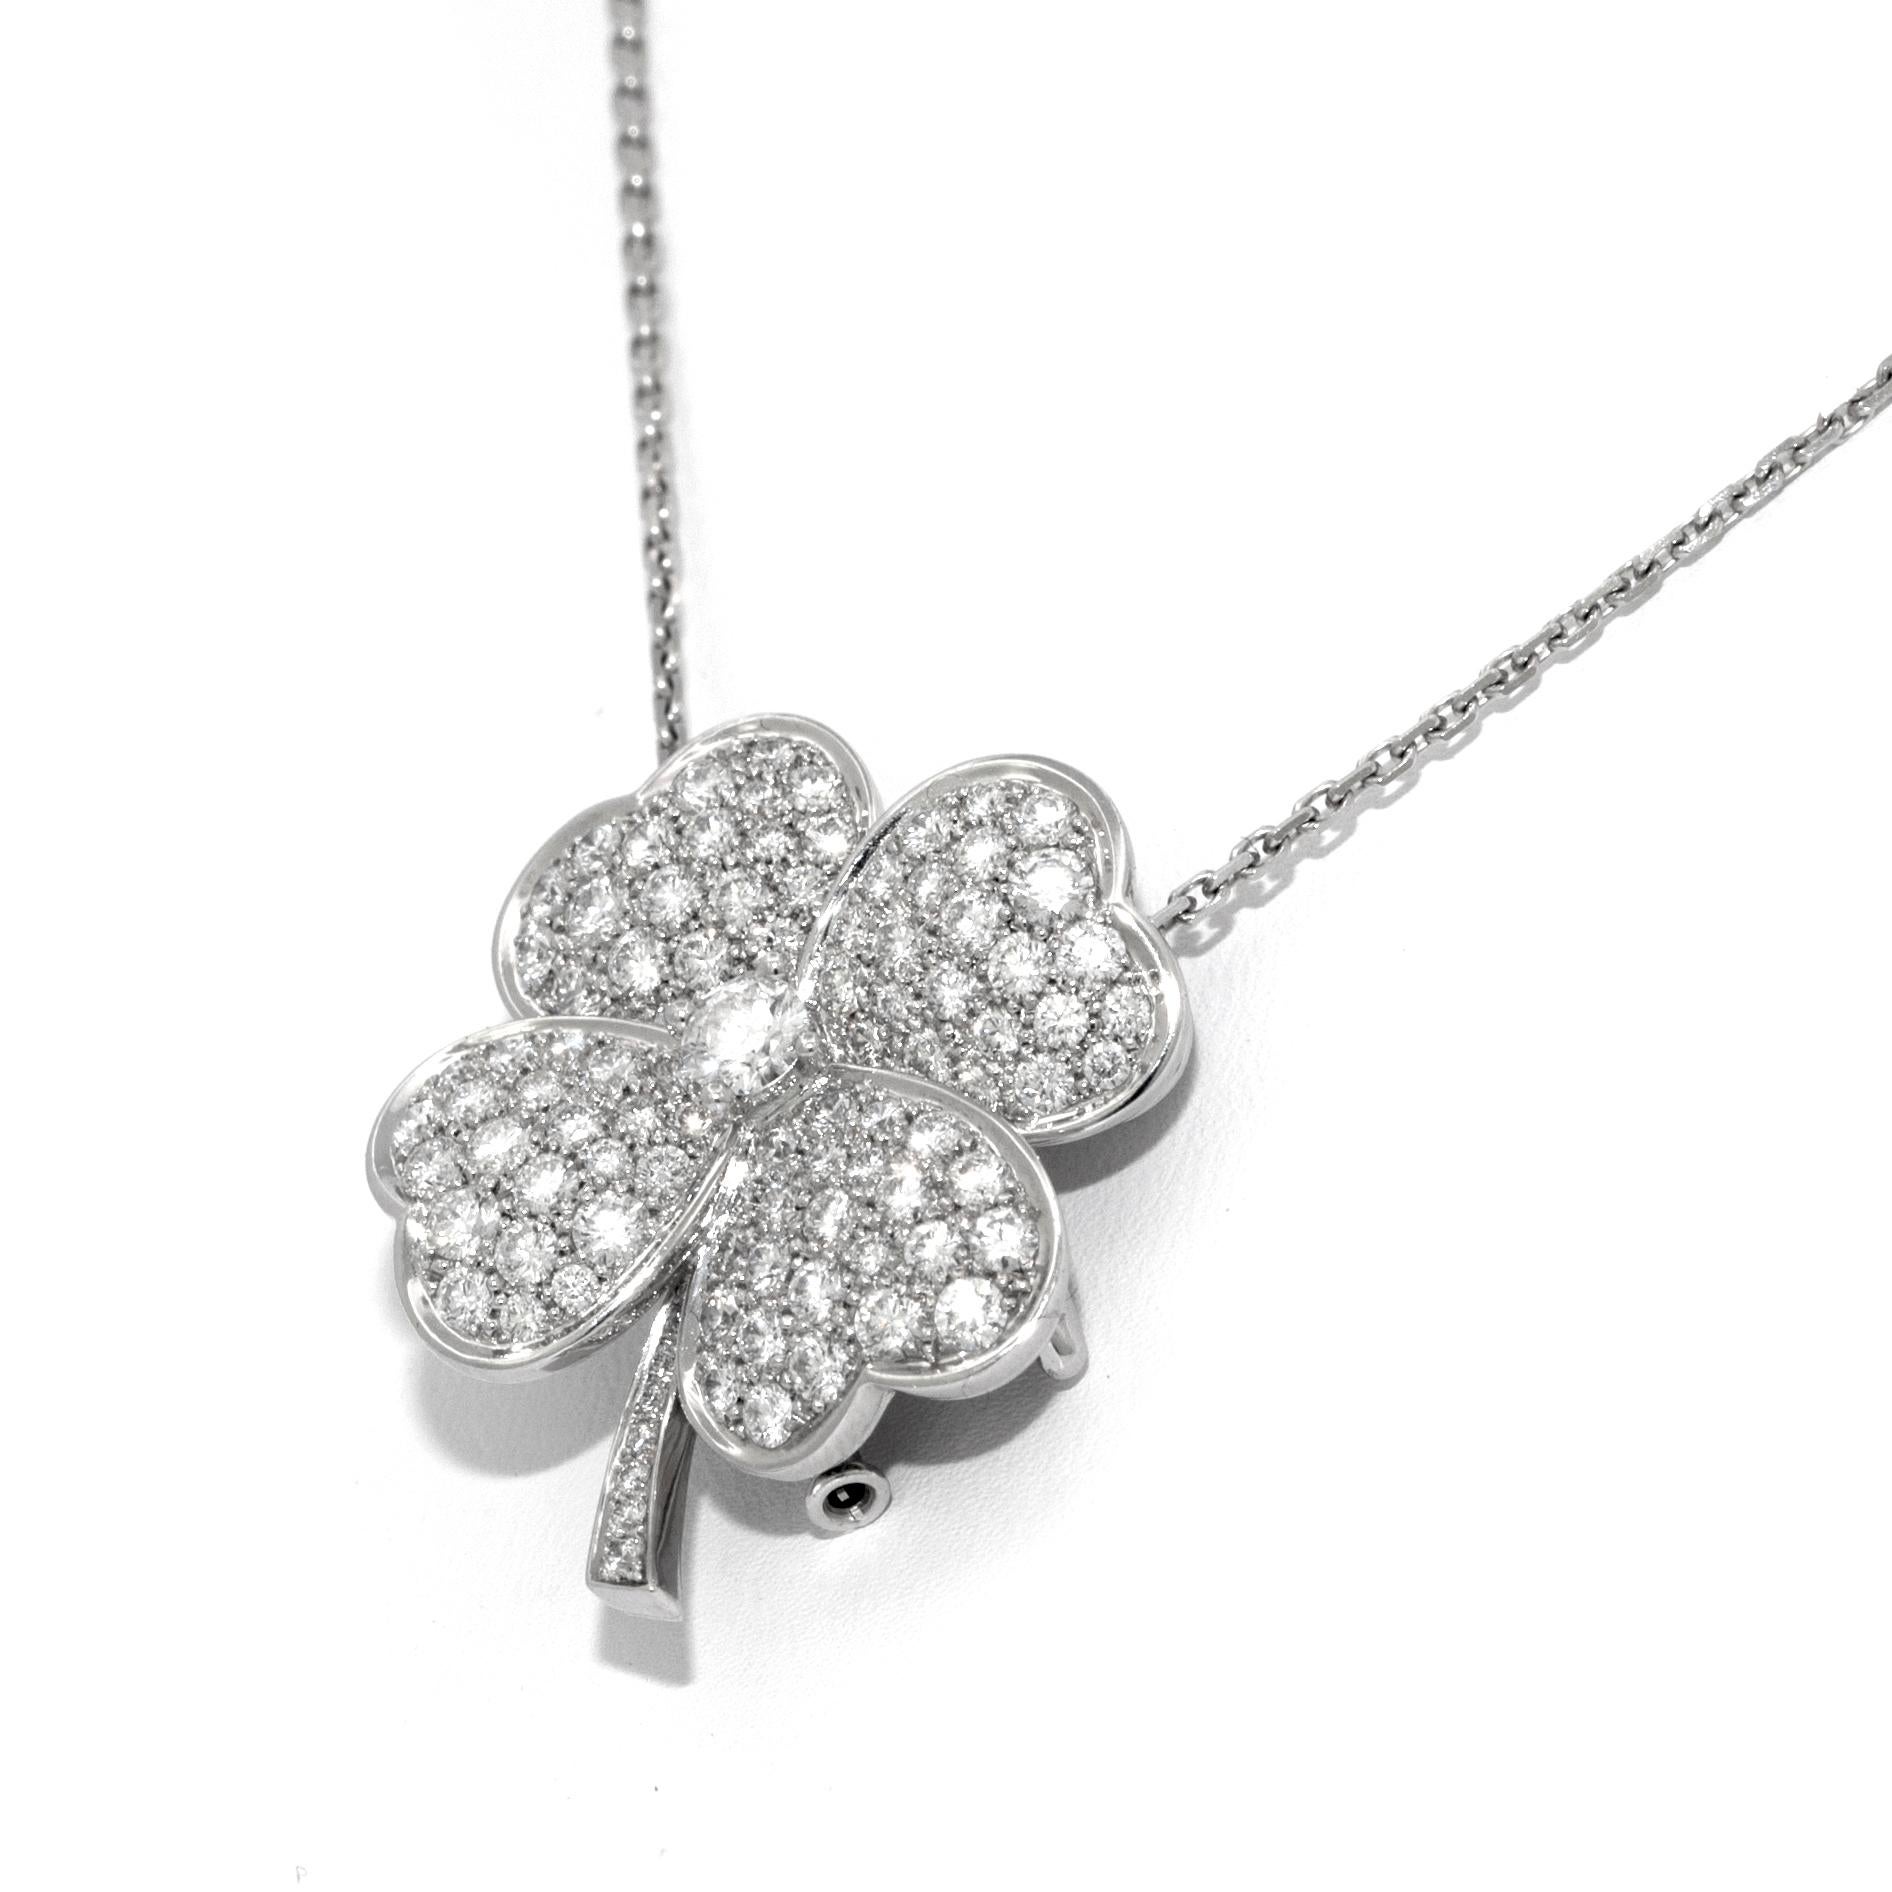 Composed of four heart-shaped petals, Cosmos™ is inspired by one of Van Cleef & Arpels' signature flowers, dating from the 1950s. The naturalistic design creates a strong sense of movement.

Cosmos clip pendant, large model, white gold, round